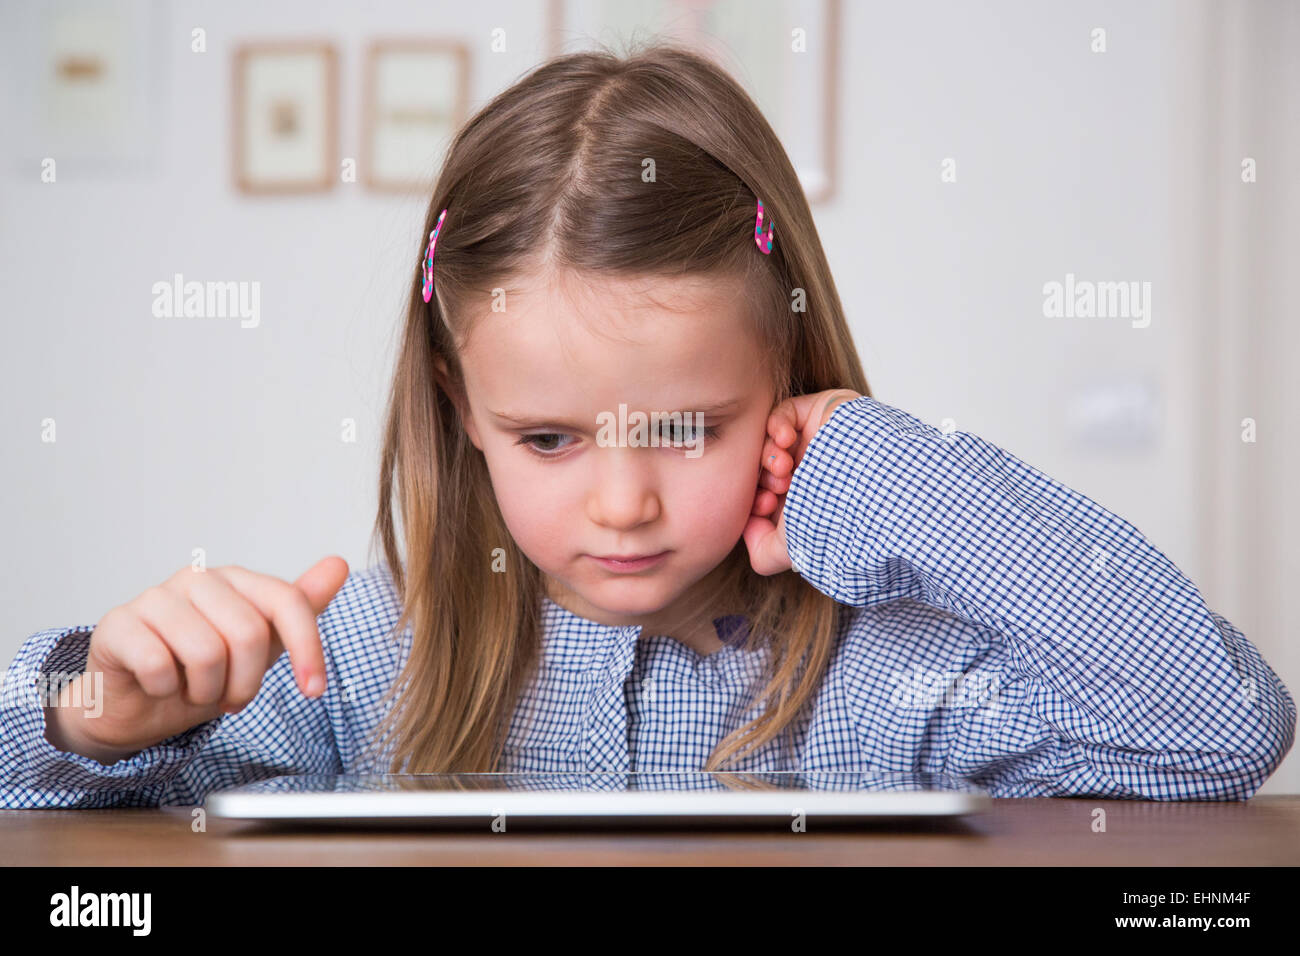 5 year-old girl using tablet computer. Banque D'Images